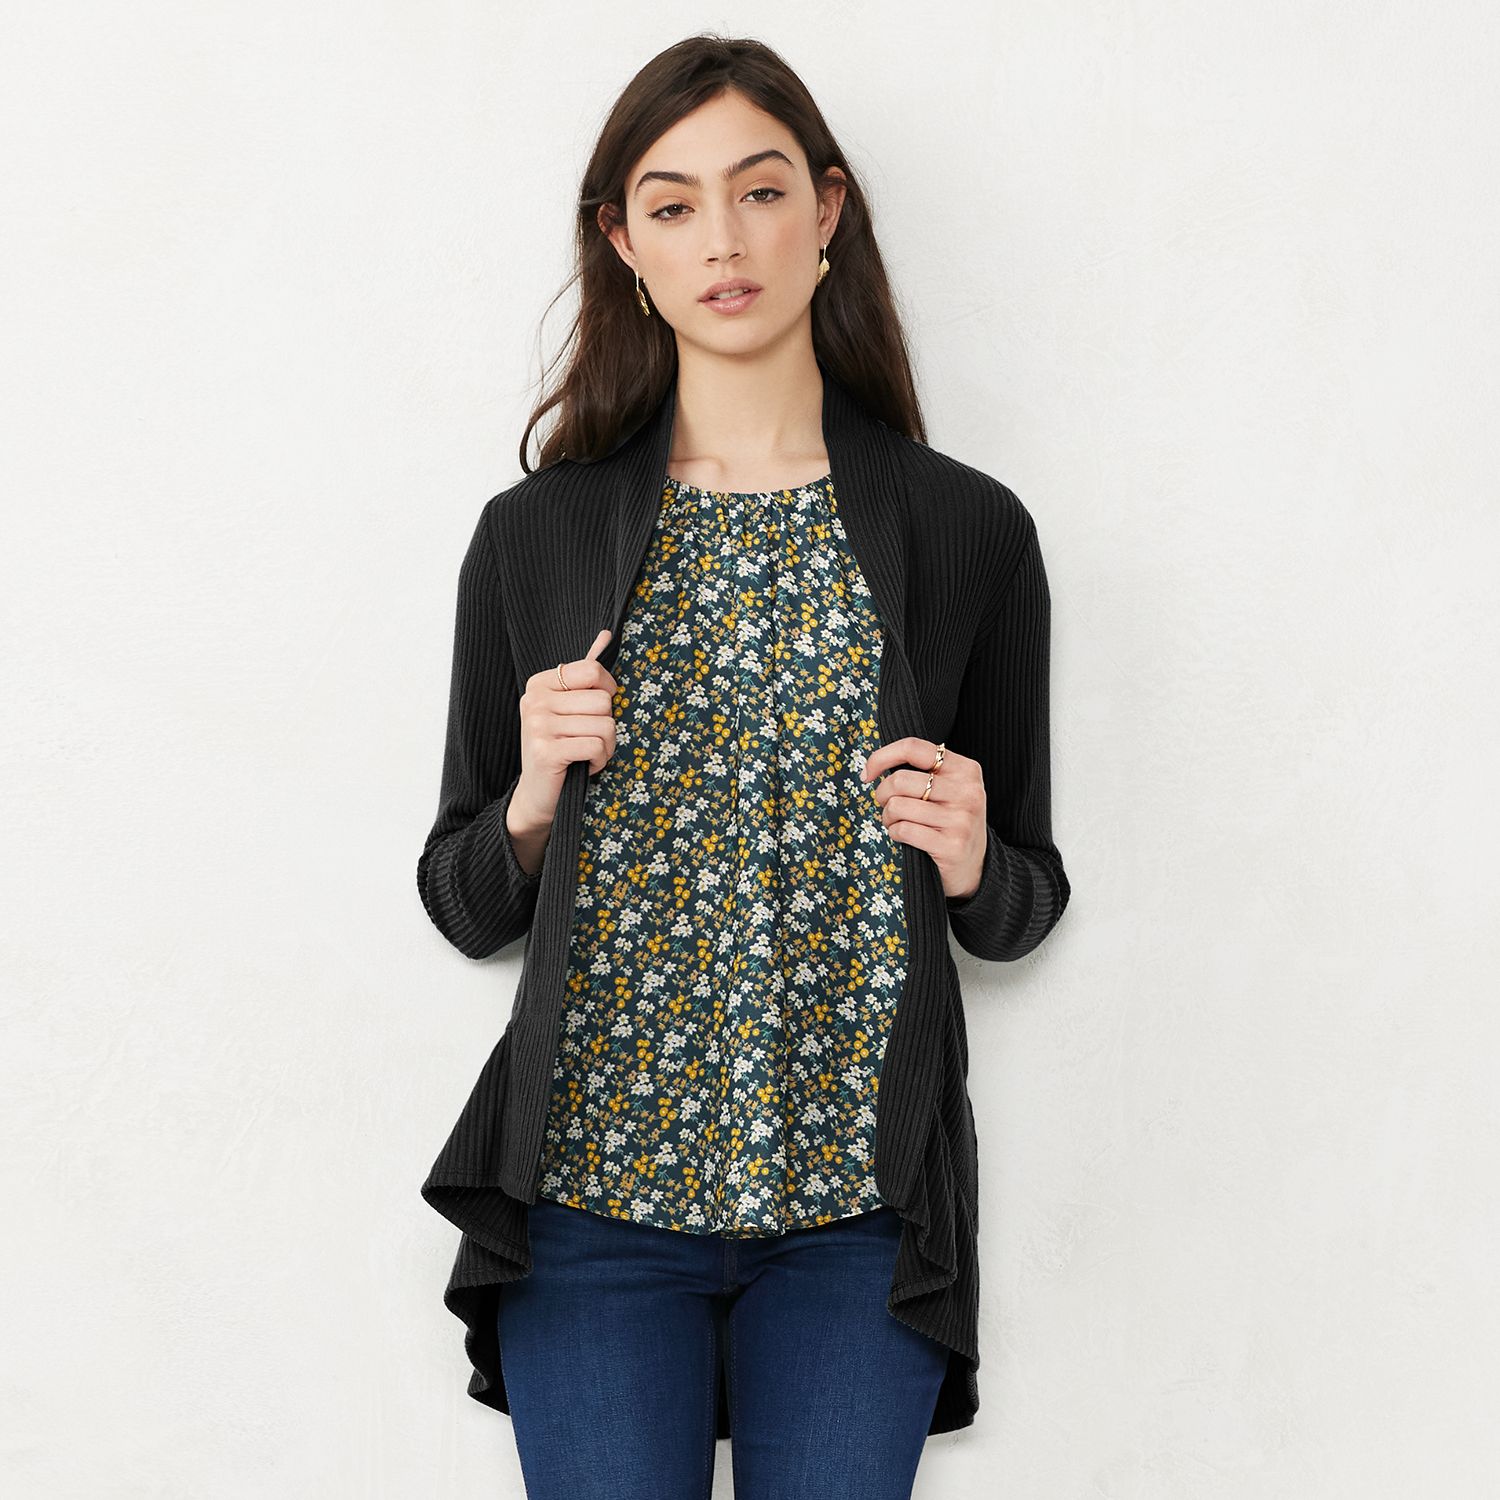 Image for LC Lauren Conrad Women's Tiered Open-Front Cardigan at Kohl's.